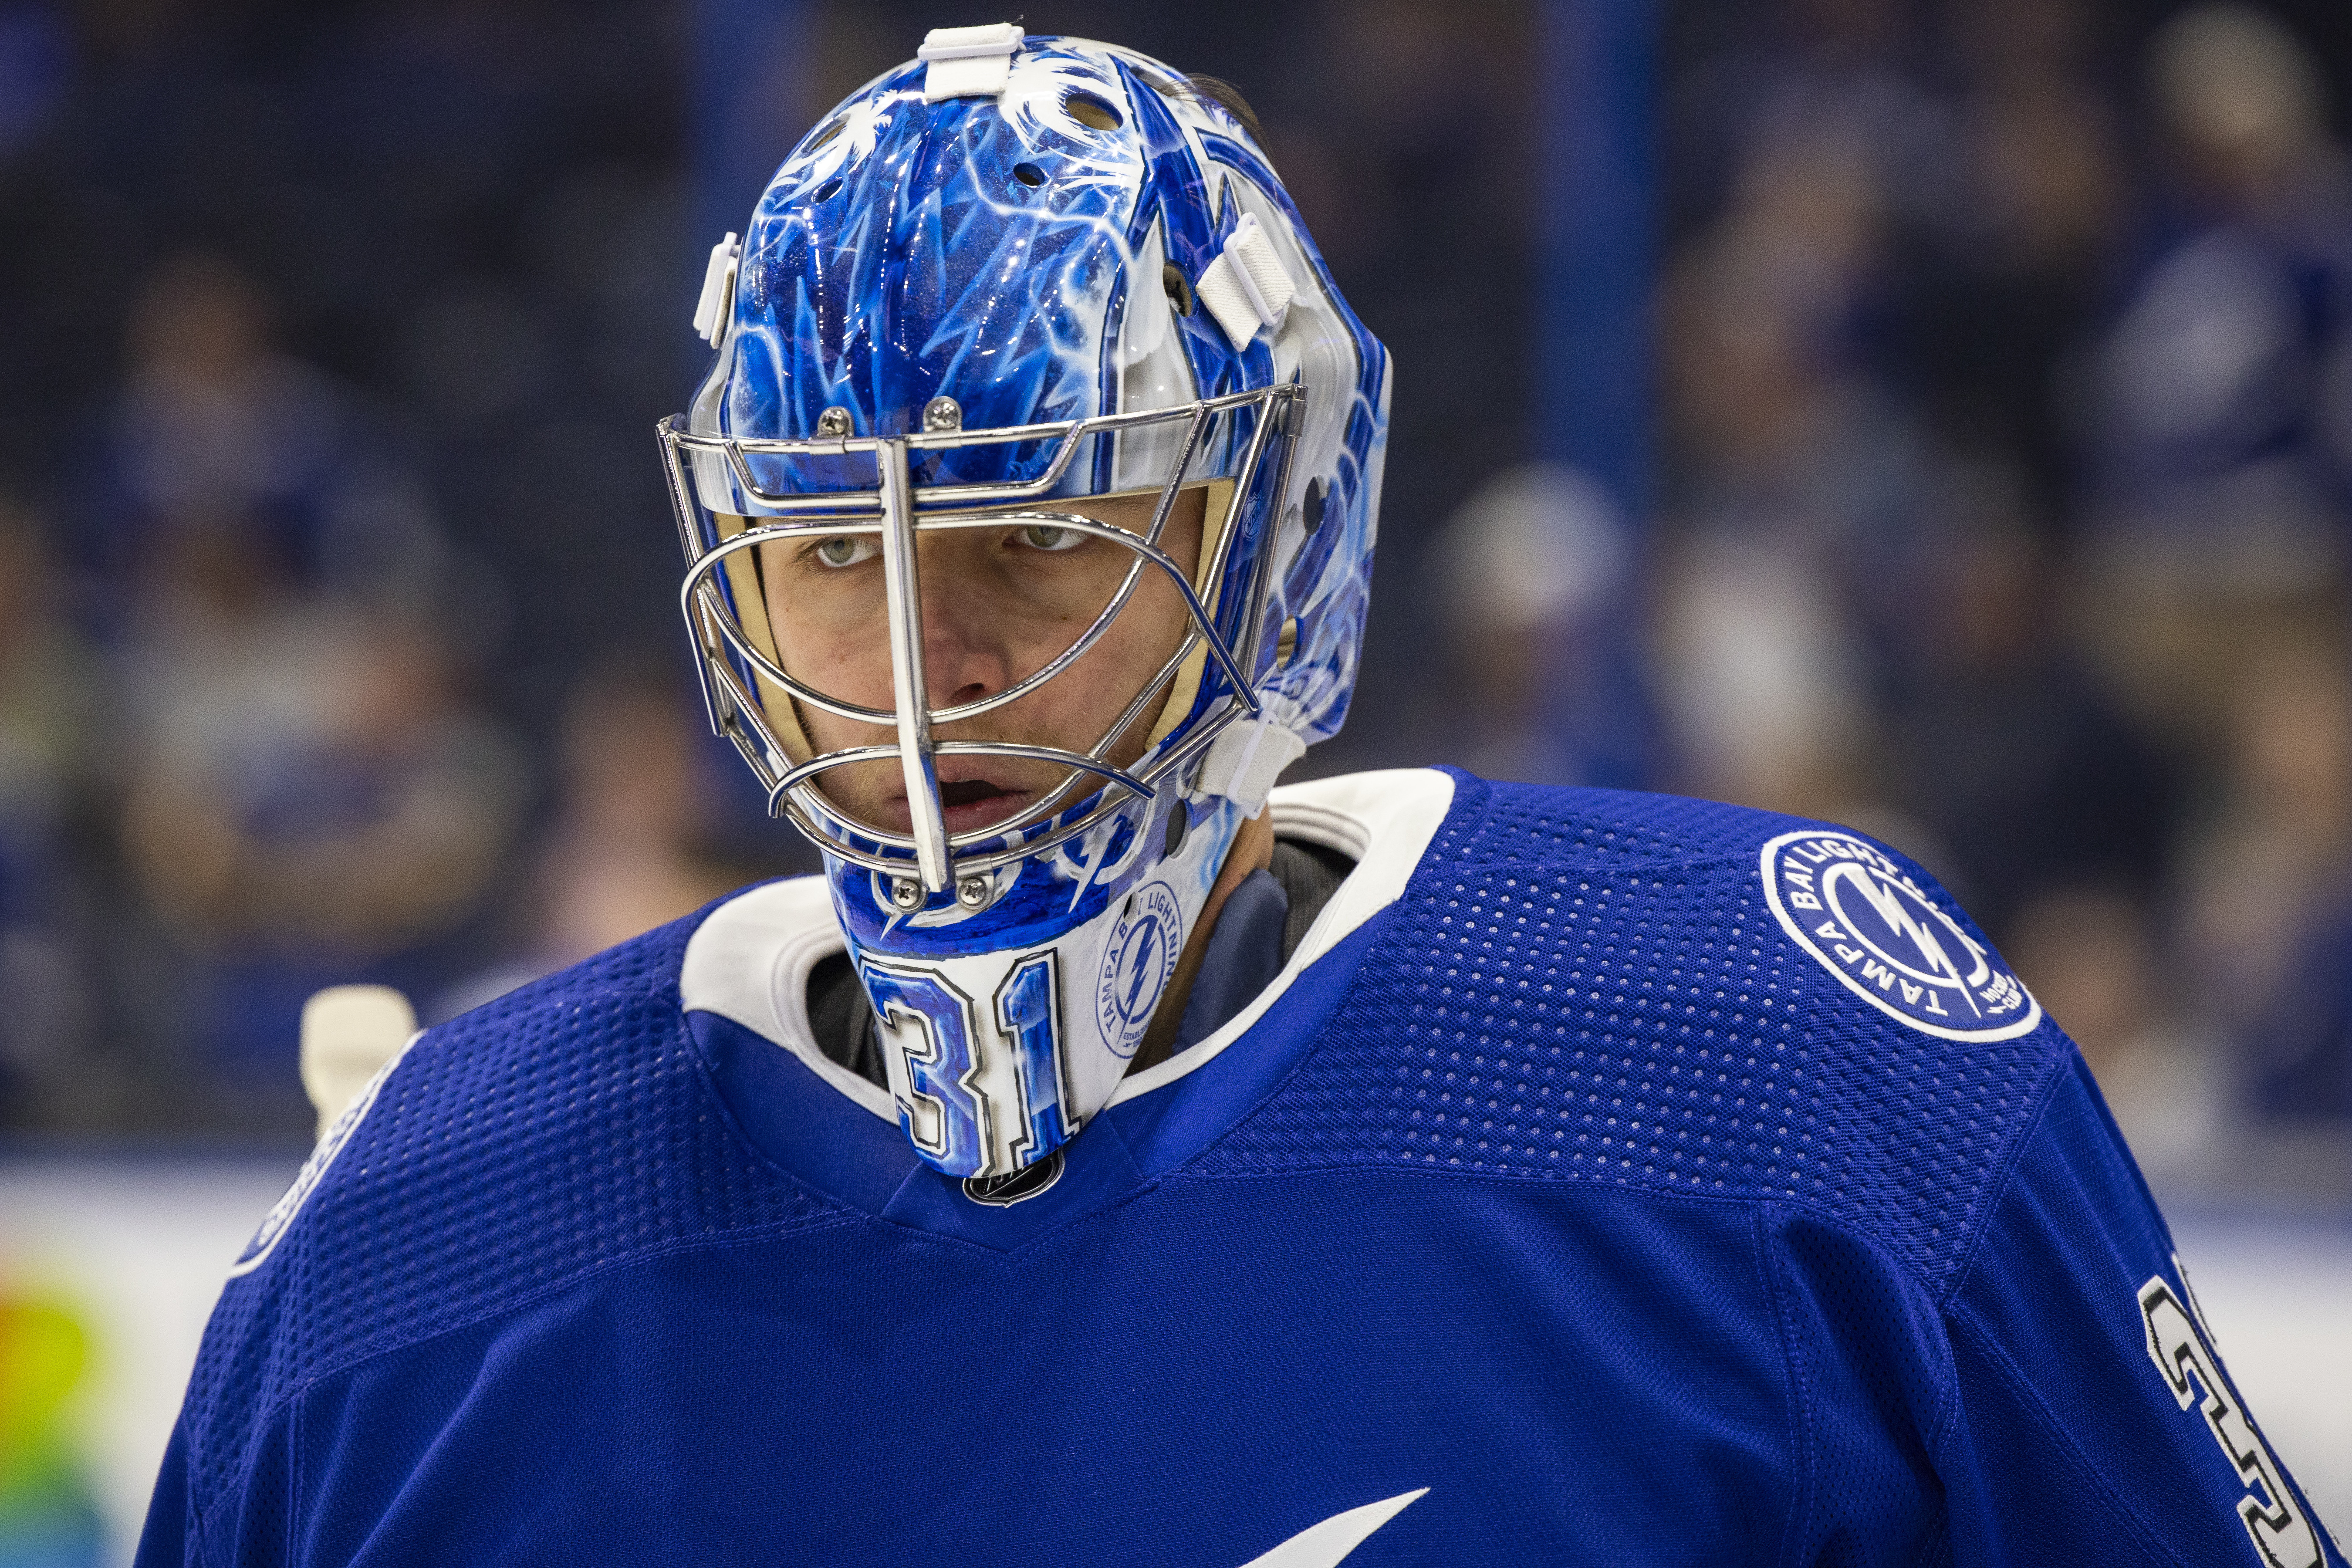 Lightning goalie Vasilevskiy is expected to miss the first 2 months of the  season after back surgery